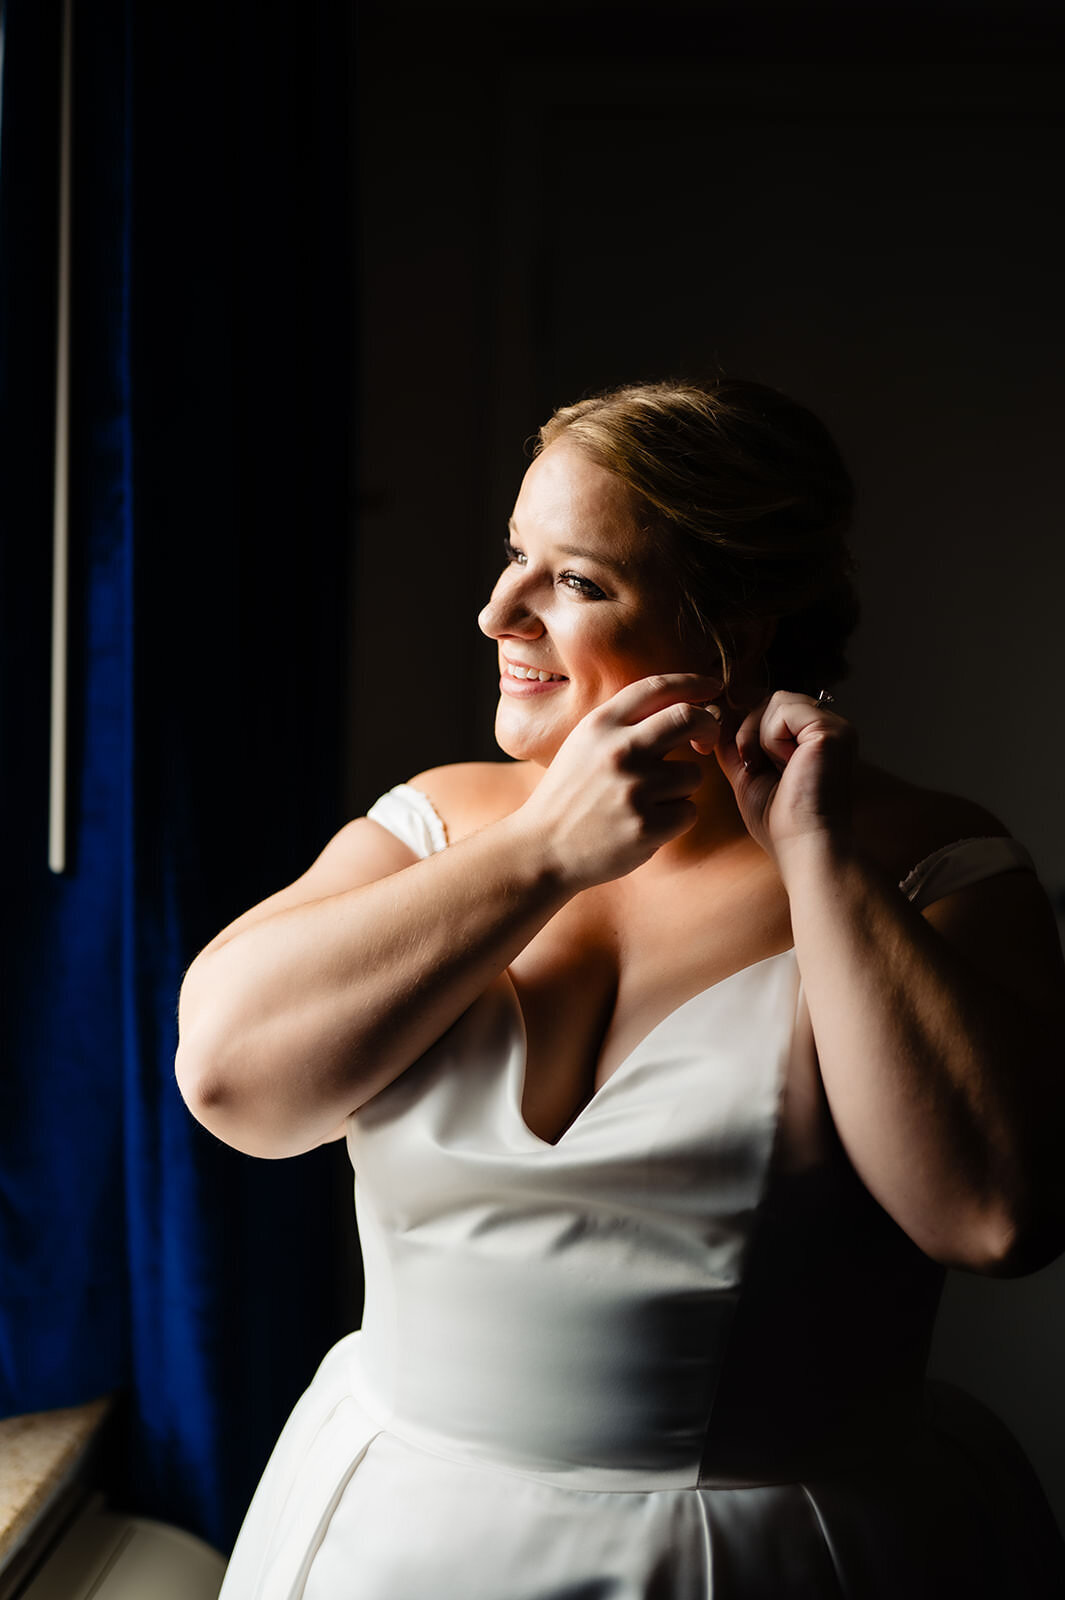 A radiant bride in a white dress, smiling as she puts on her earring, with light streaming in from a window